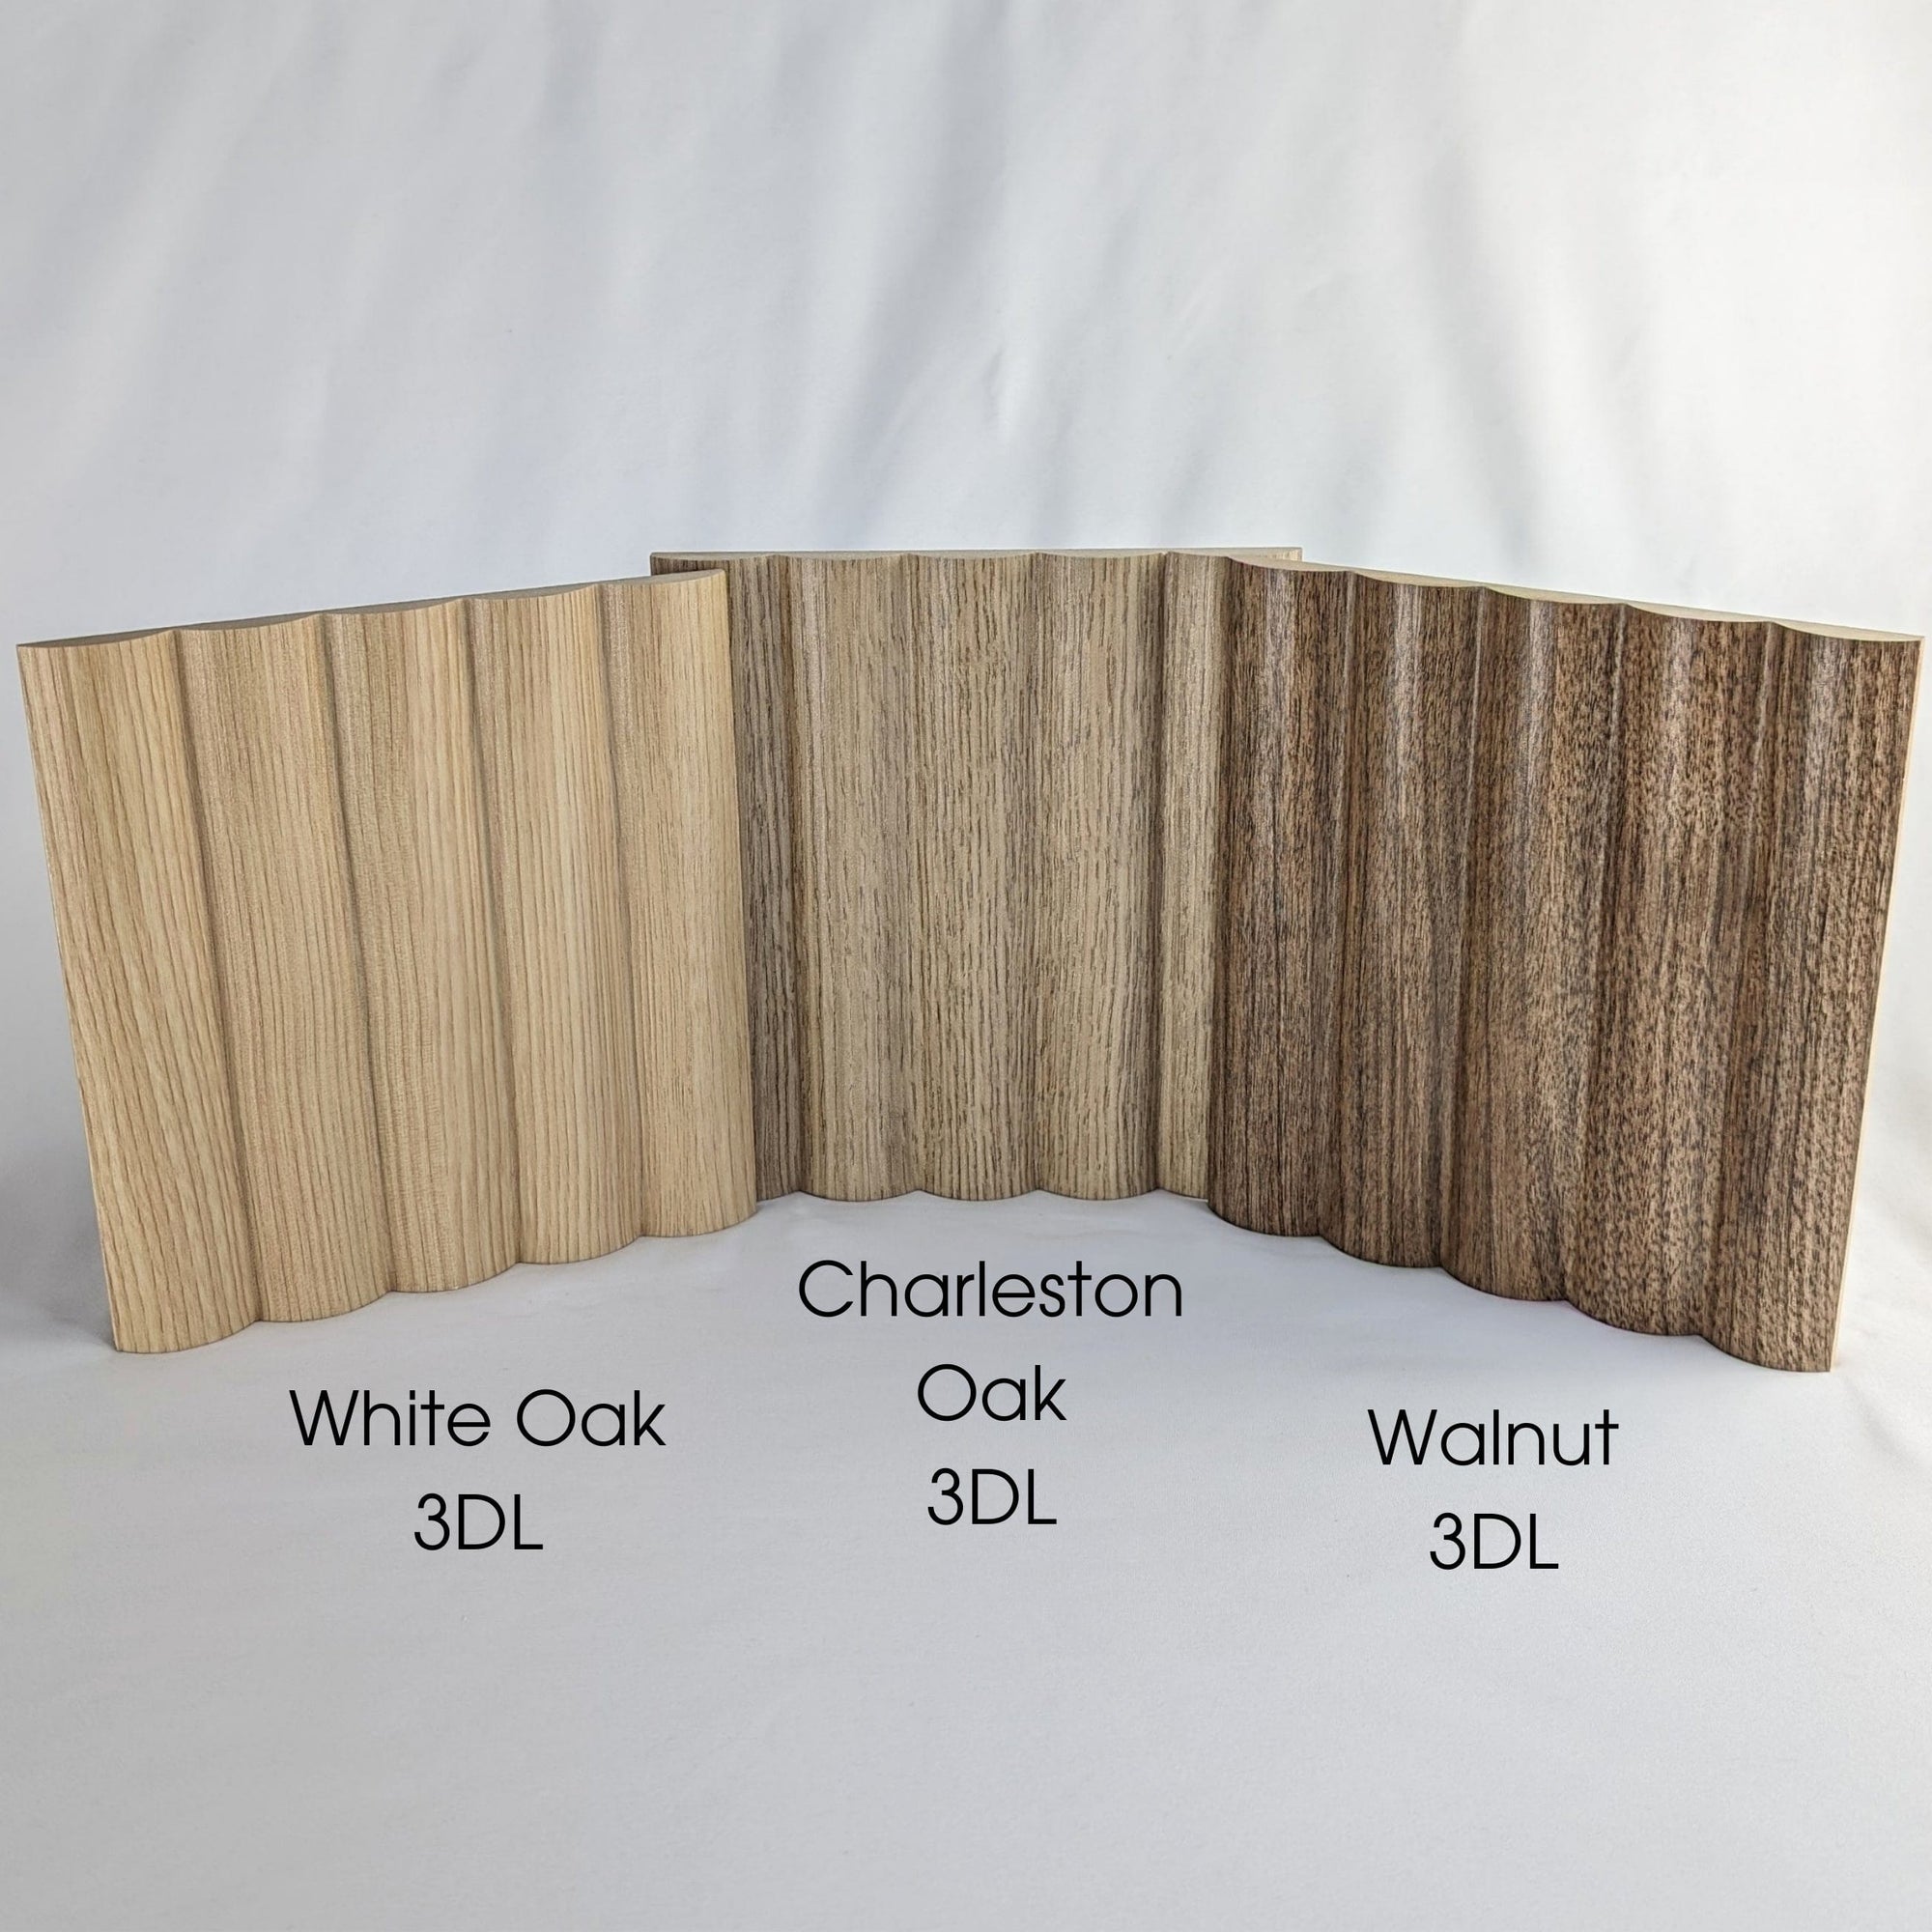 Walston Architectural Products Wall Panel Reeded Wall Panels - 1-1/2" Reeds Reeded Wall Panels - 1-1/2" Reeds | Walston Door Company